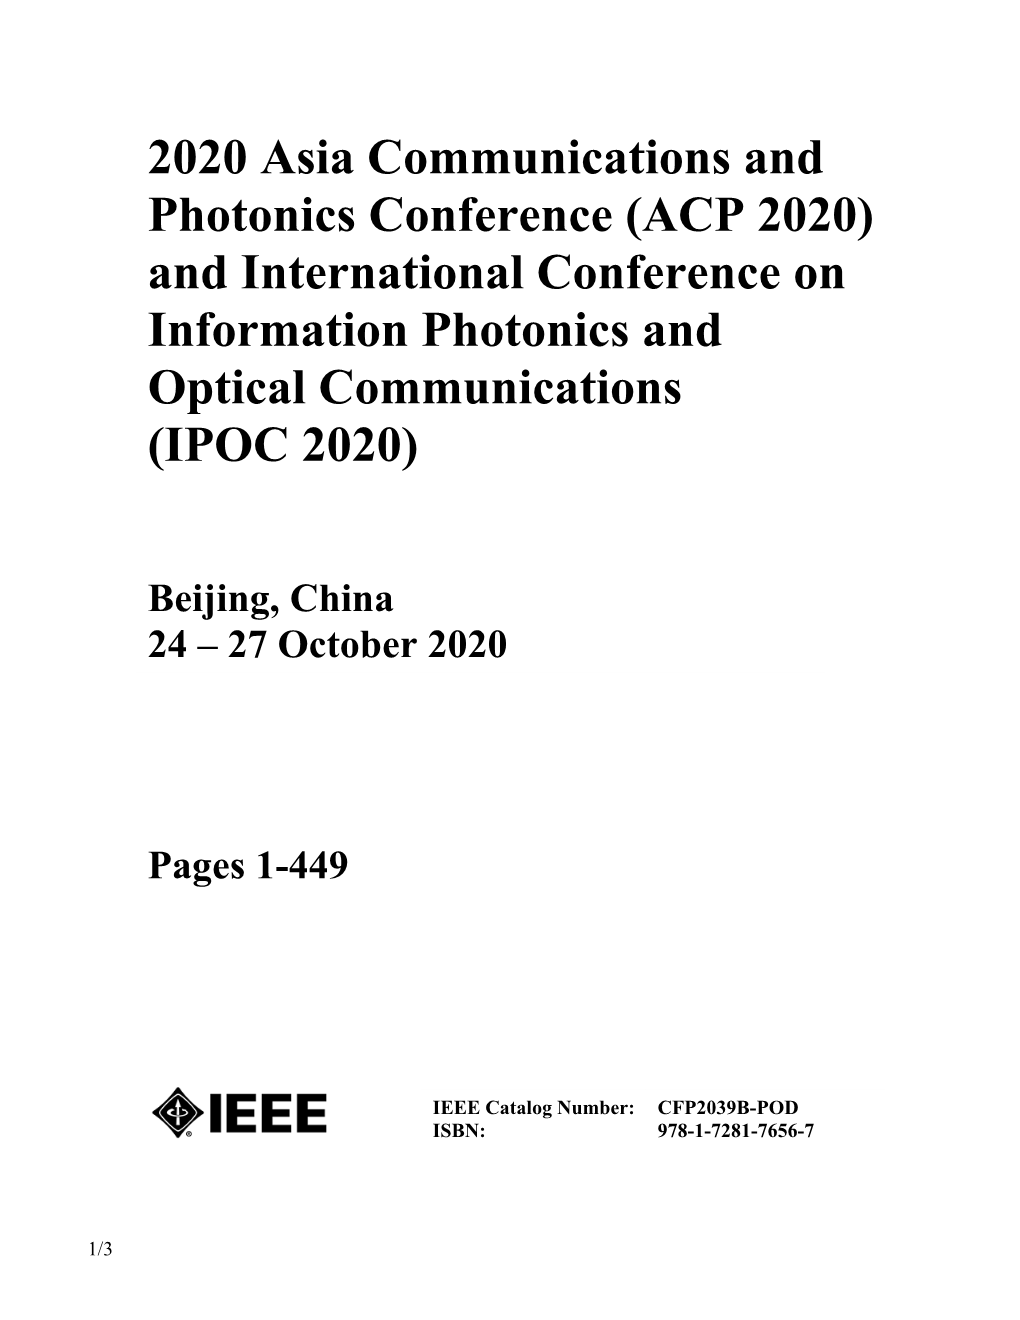 2020 Asia Communications and Photonics Conference (ACP 2020) and International Conference on Information Photonics and Optical Communications